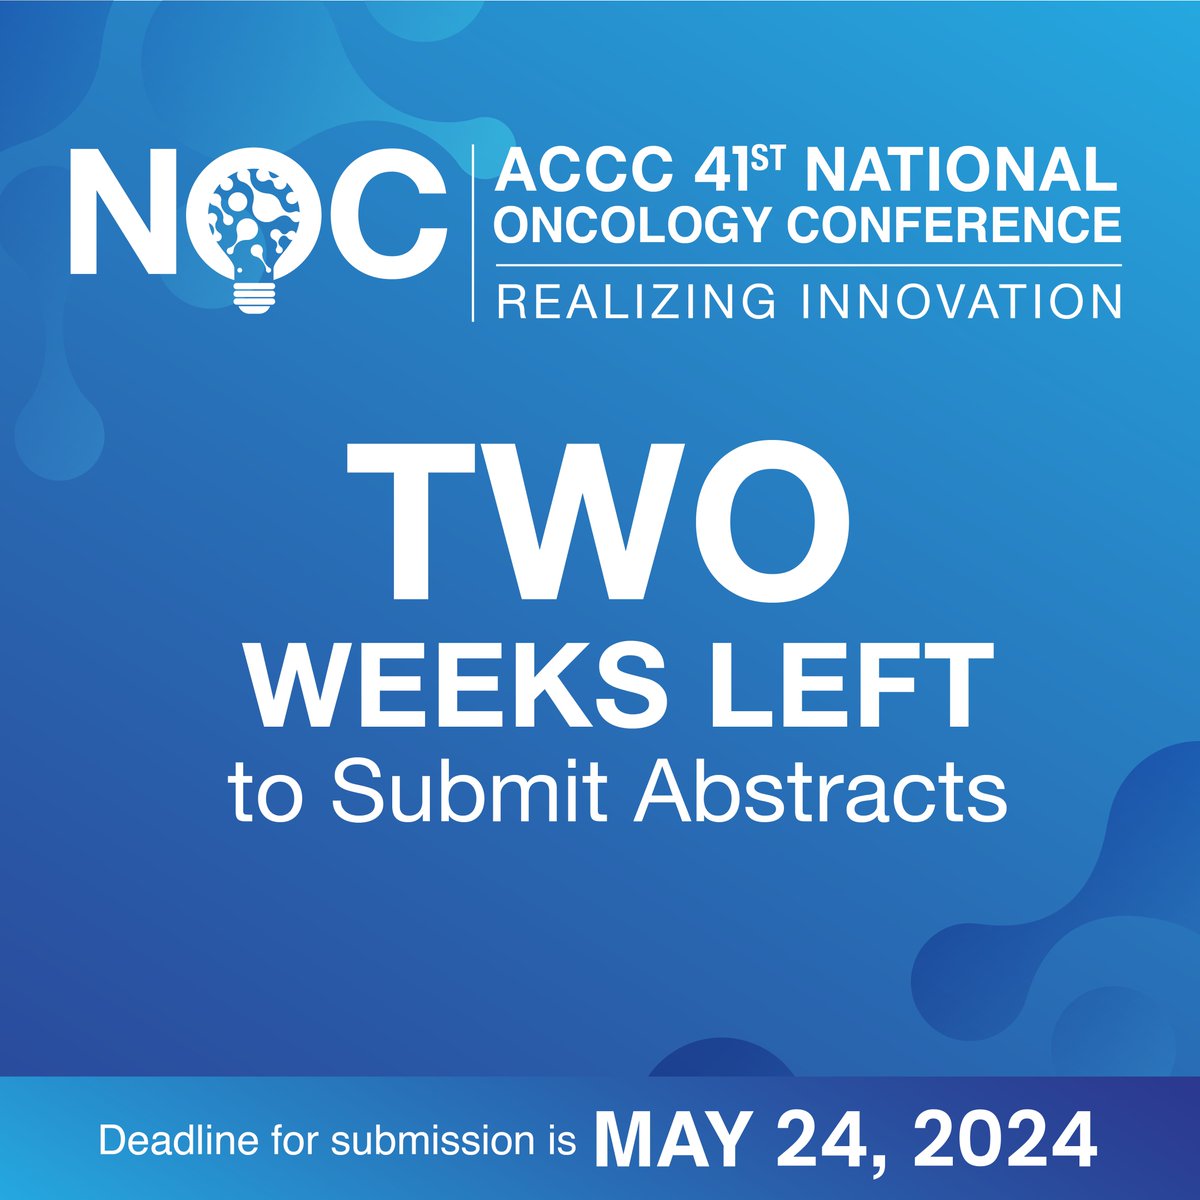 There’s just 2 weeks left to submit abstracts for the ACCC 41st National Oncology Conference, Oct 9-11, in Minneapolis, MN. Tell us how your program supports the 2024-2025 President’s Theme: Reimagining Community Engagement and Equity in Cancer. Learn more bit.ly/3TX2vUI